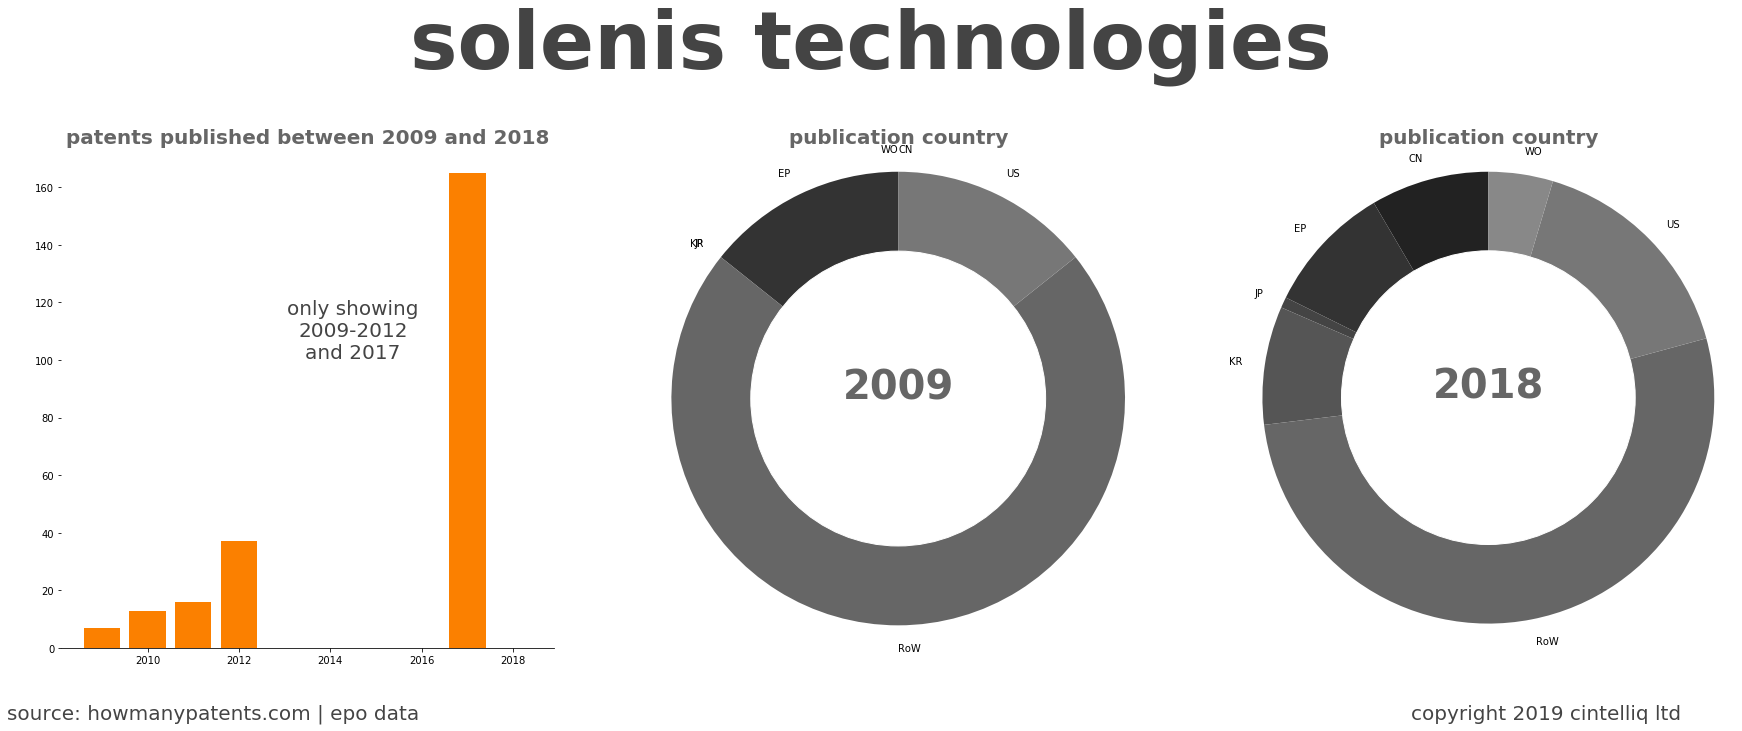 summary of patents for Solenis Technologies